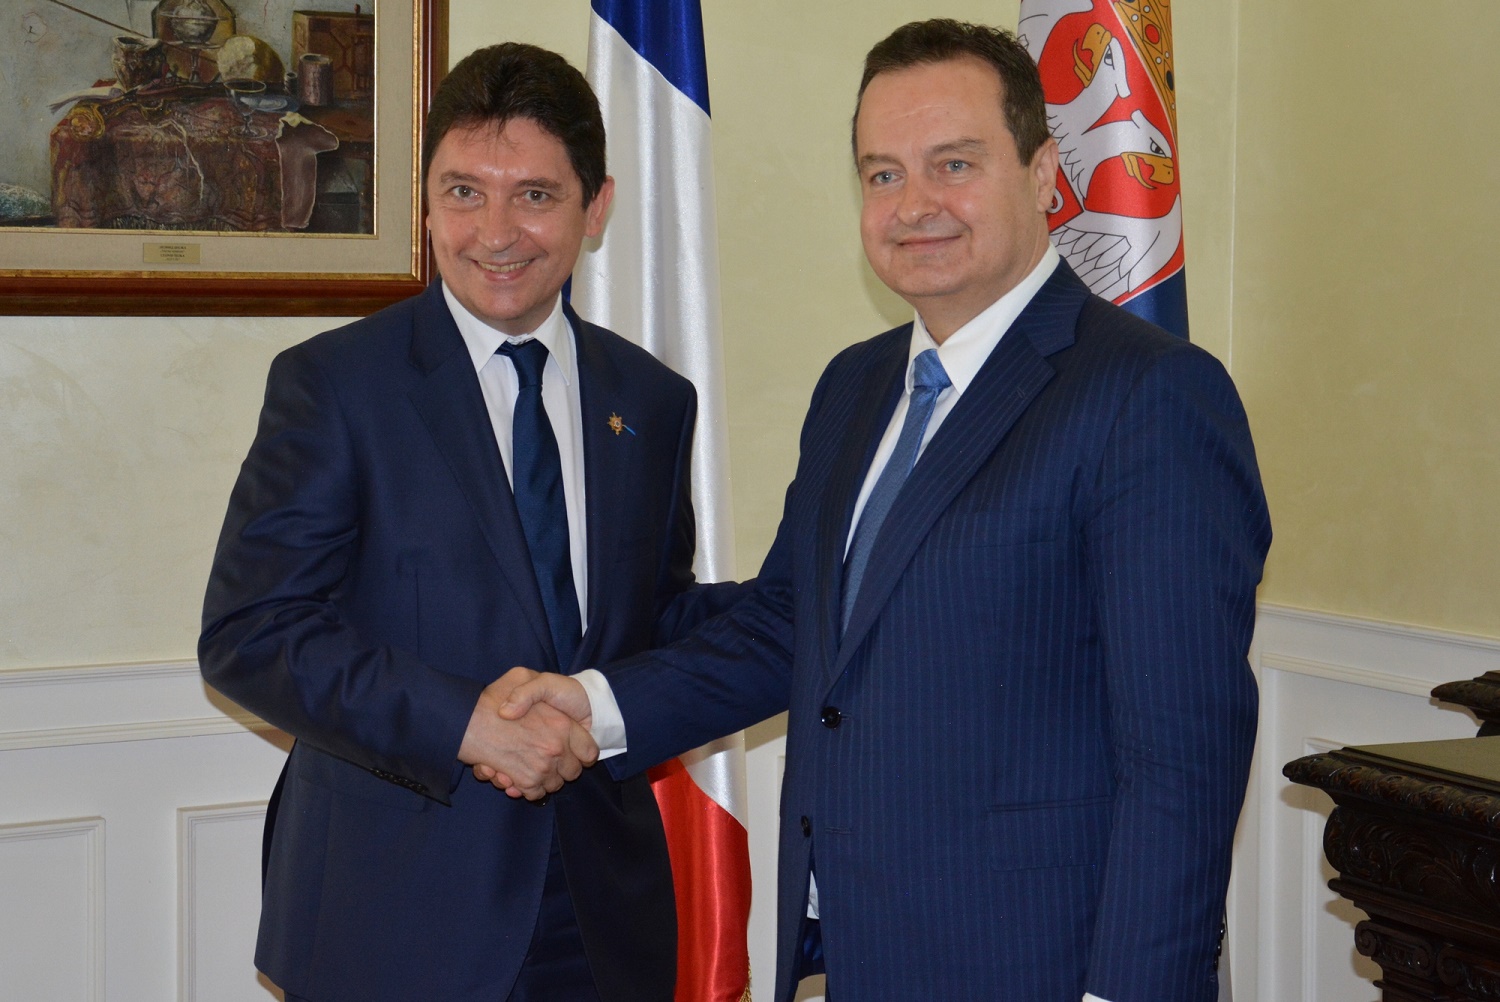 Ivica Dacic and Olivier Cadic